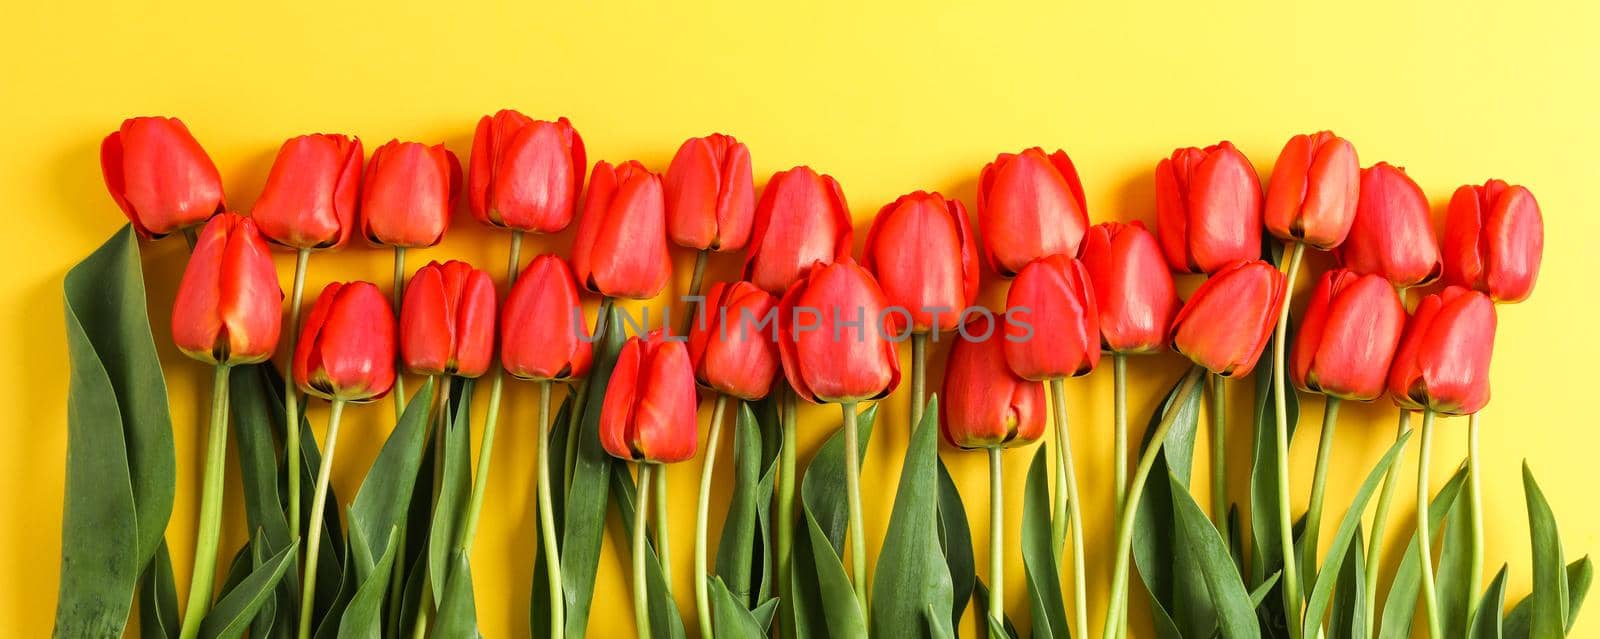 Composition with beautiful red tulips on yellow background. Spring flowers